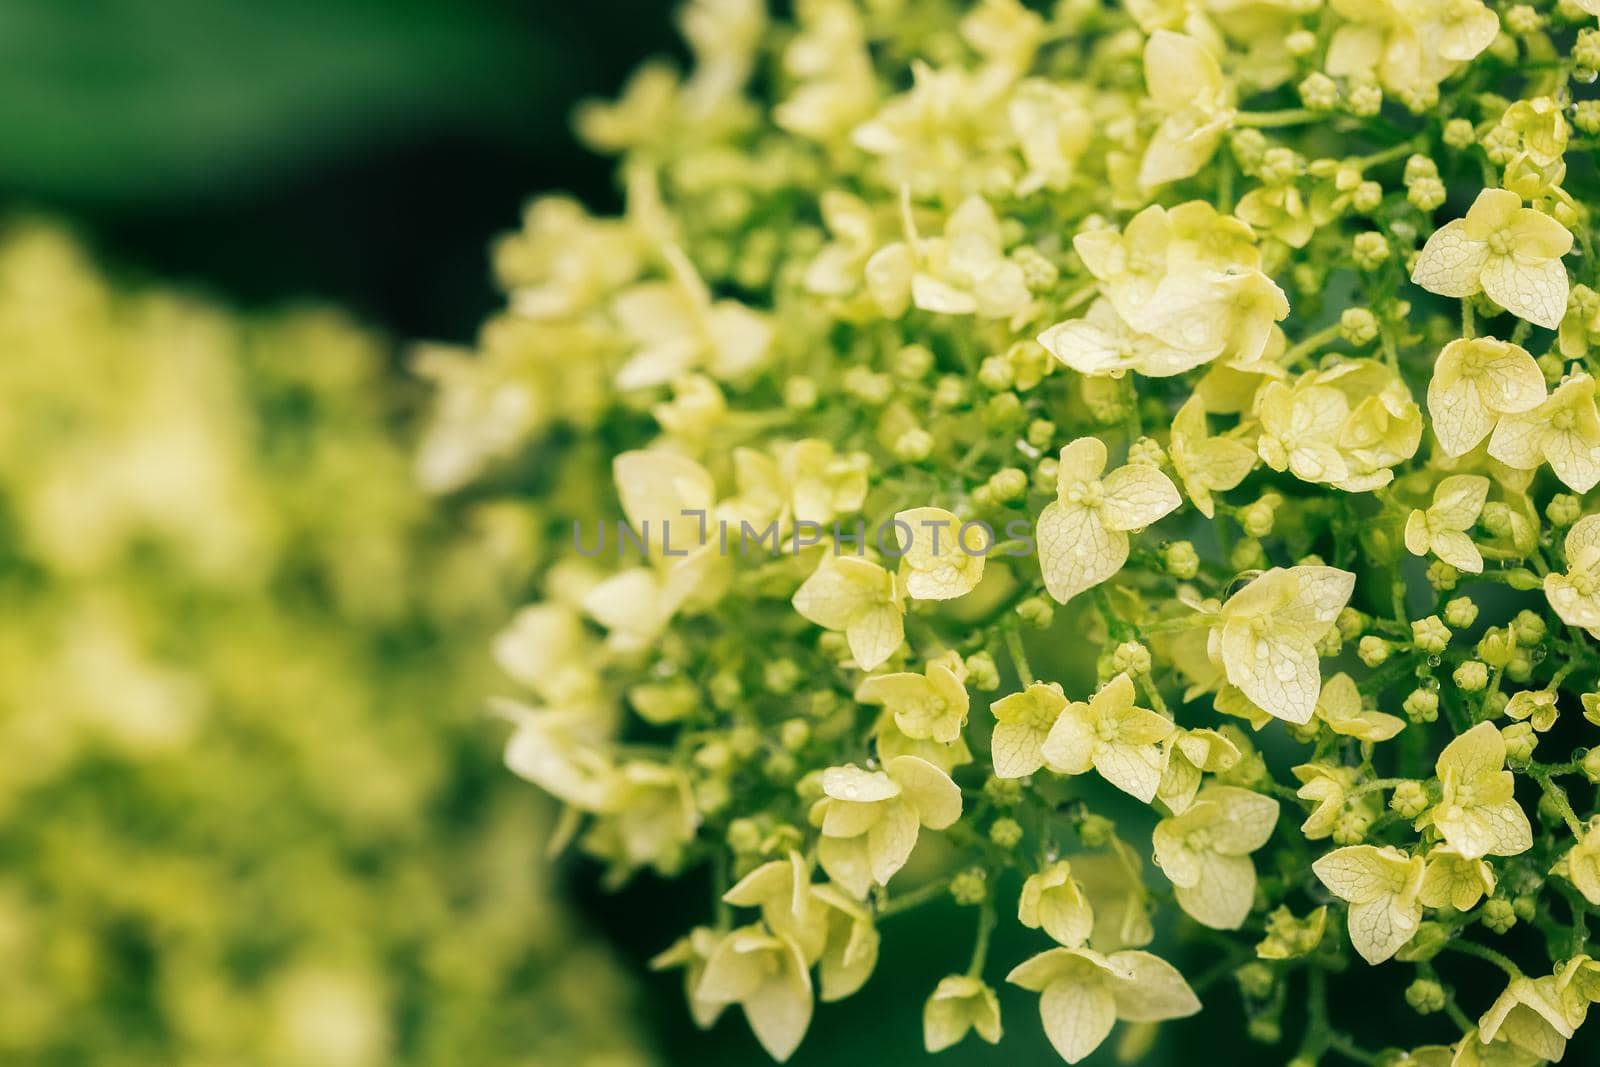 Closeup of beautiful white Hydrangea flowers after the rain, selective focus, blurred background.